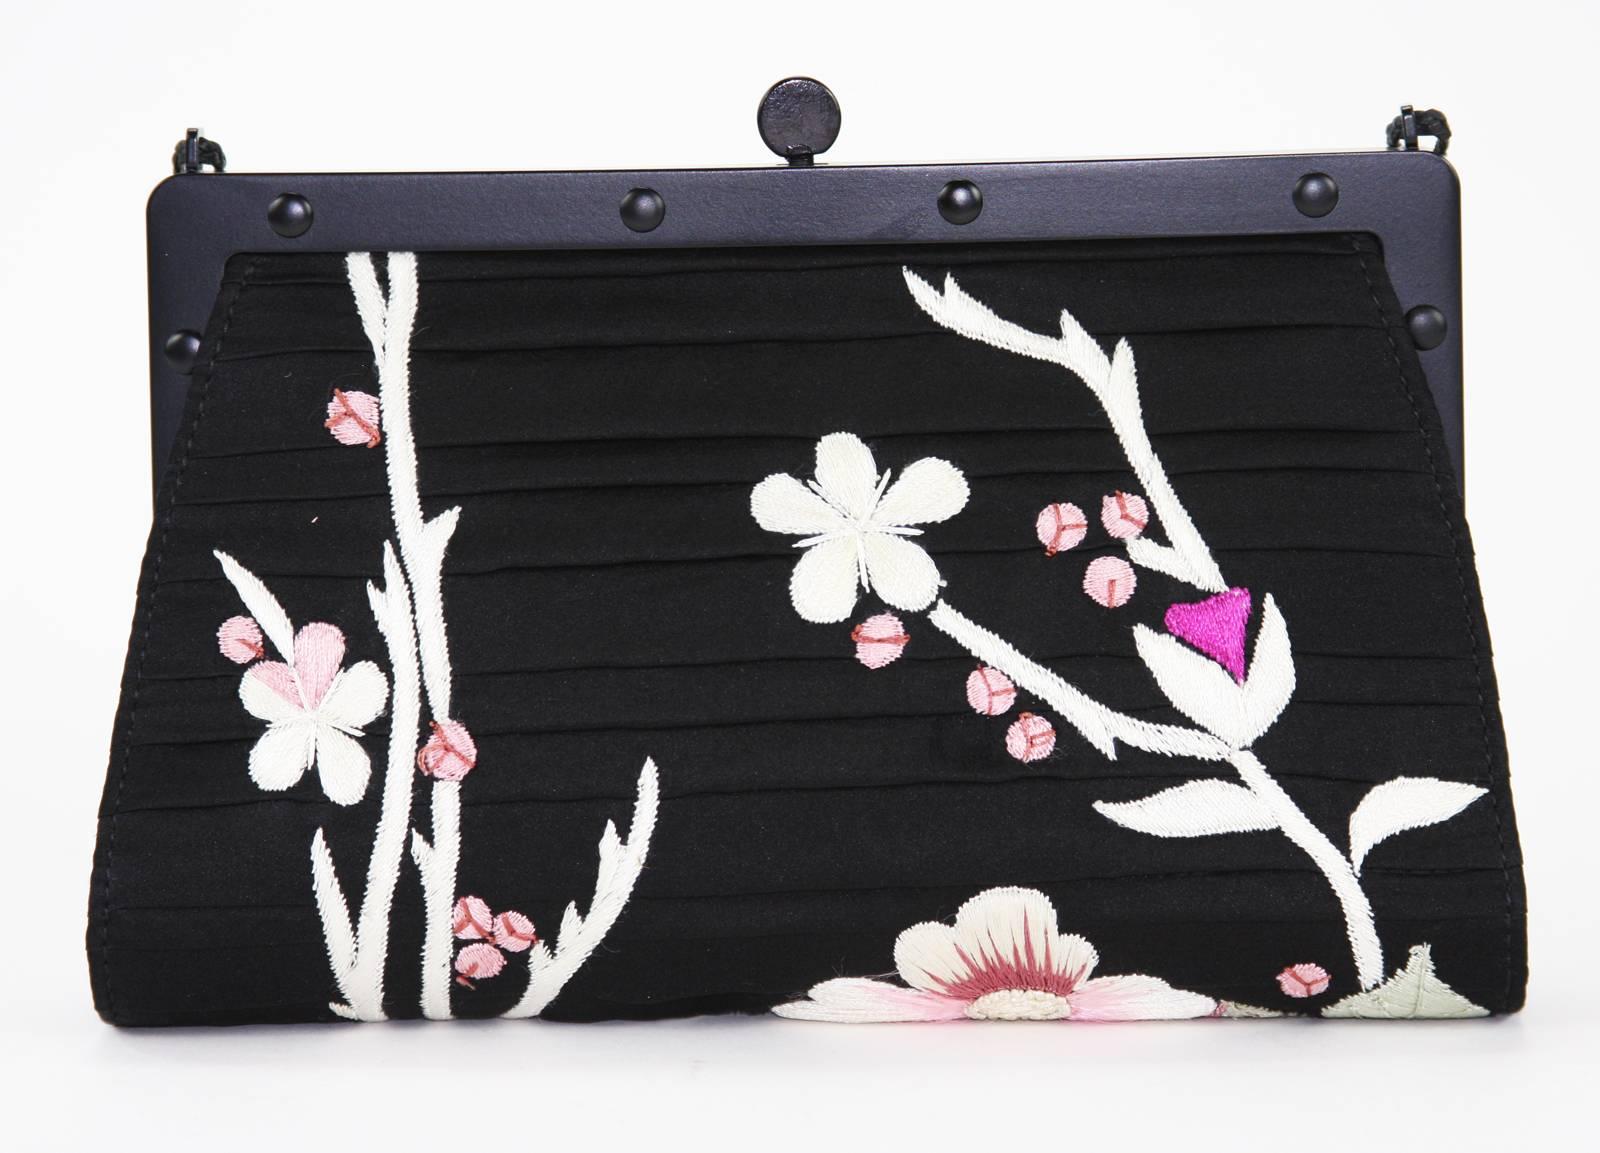 Tom Ford for Gucci Japanese Flowers Black Silk Frame Bag Clutch 
S/S 2003 Collection
100% Silk, Leather
Floral Japanese Embroidery in Pink, White, Soft Green, Burgundy.
Frame-Shaped Opening, Snap Lock for Closure
Matte Black Hardware, Leather